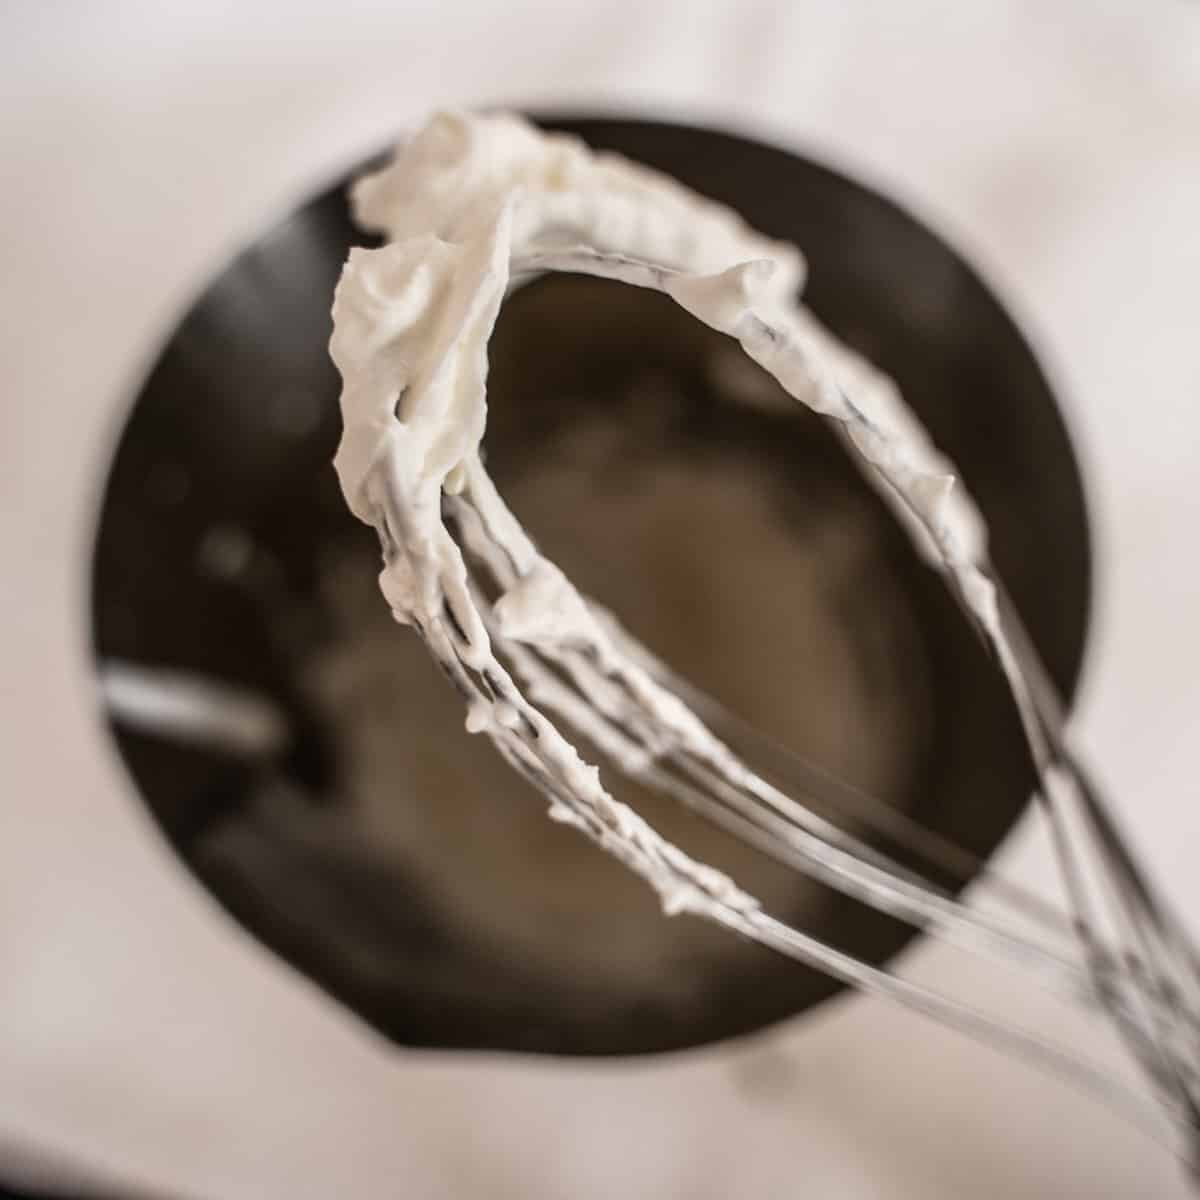 whipped cream on mixer beater